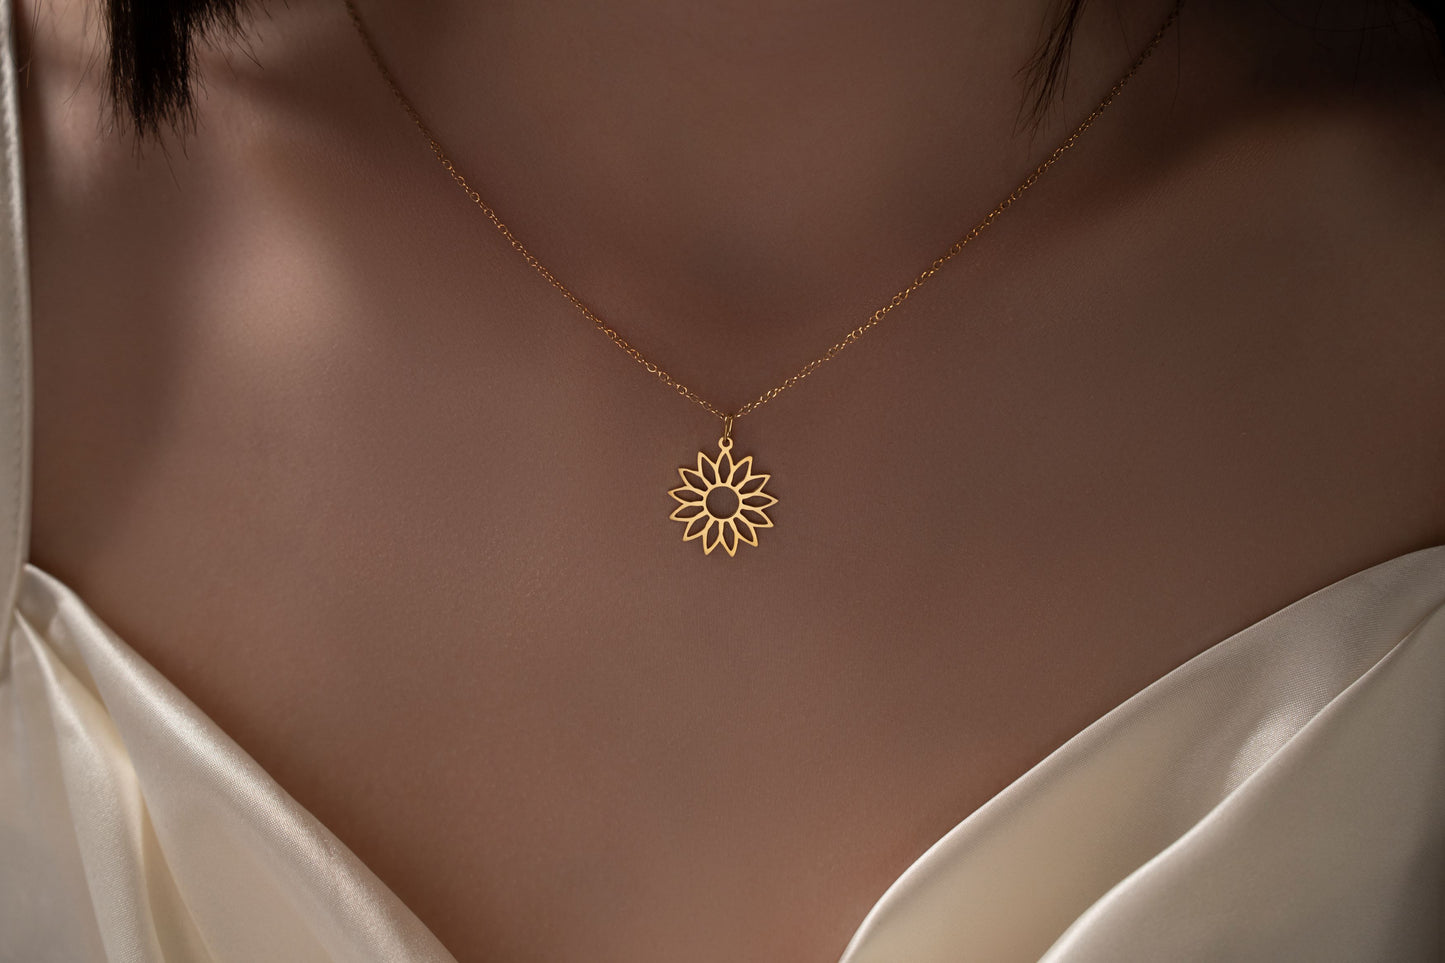 Necklace Pendant with Sunflower